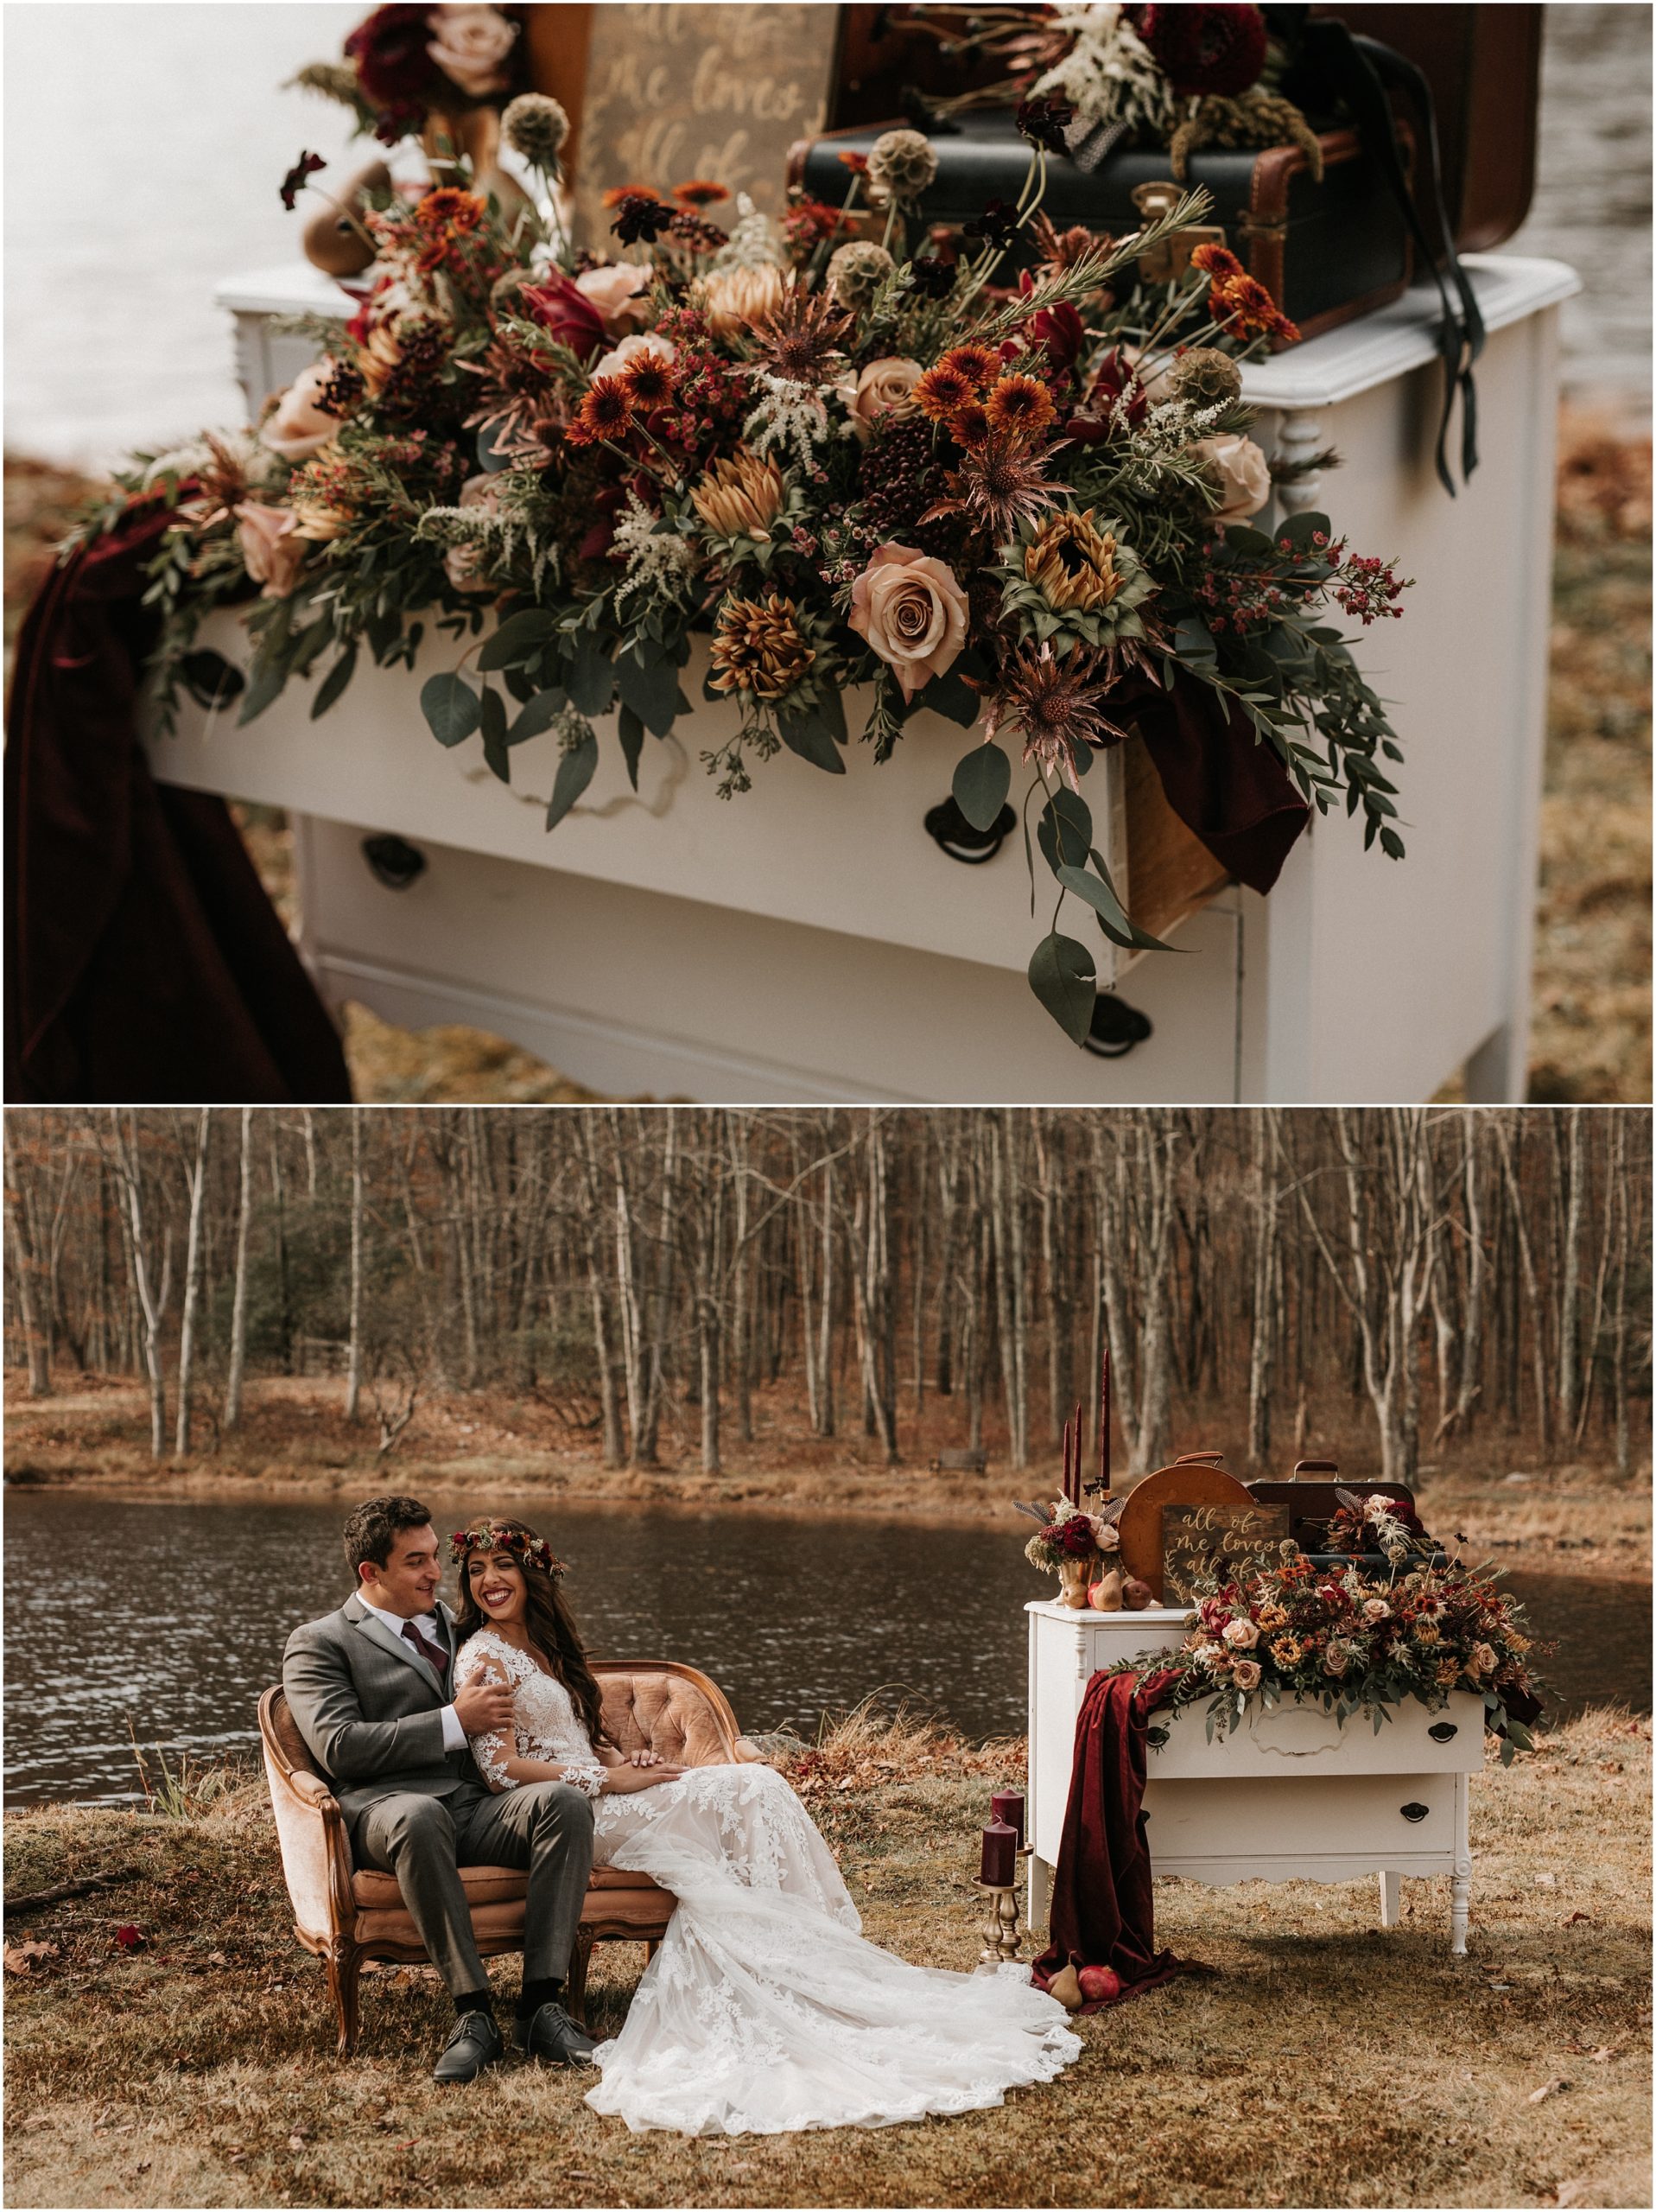 Fall Whimsical Outdoor Styled Wedding Portraits and Decor